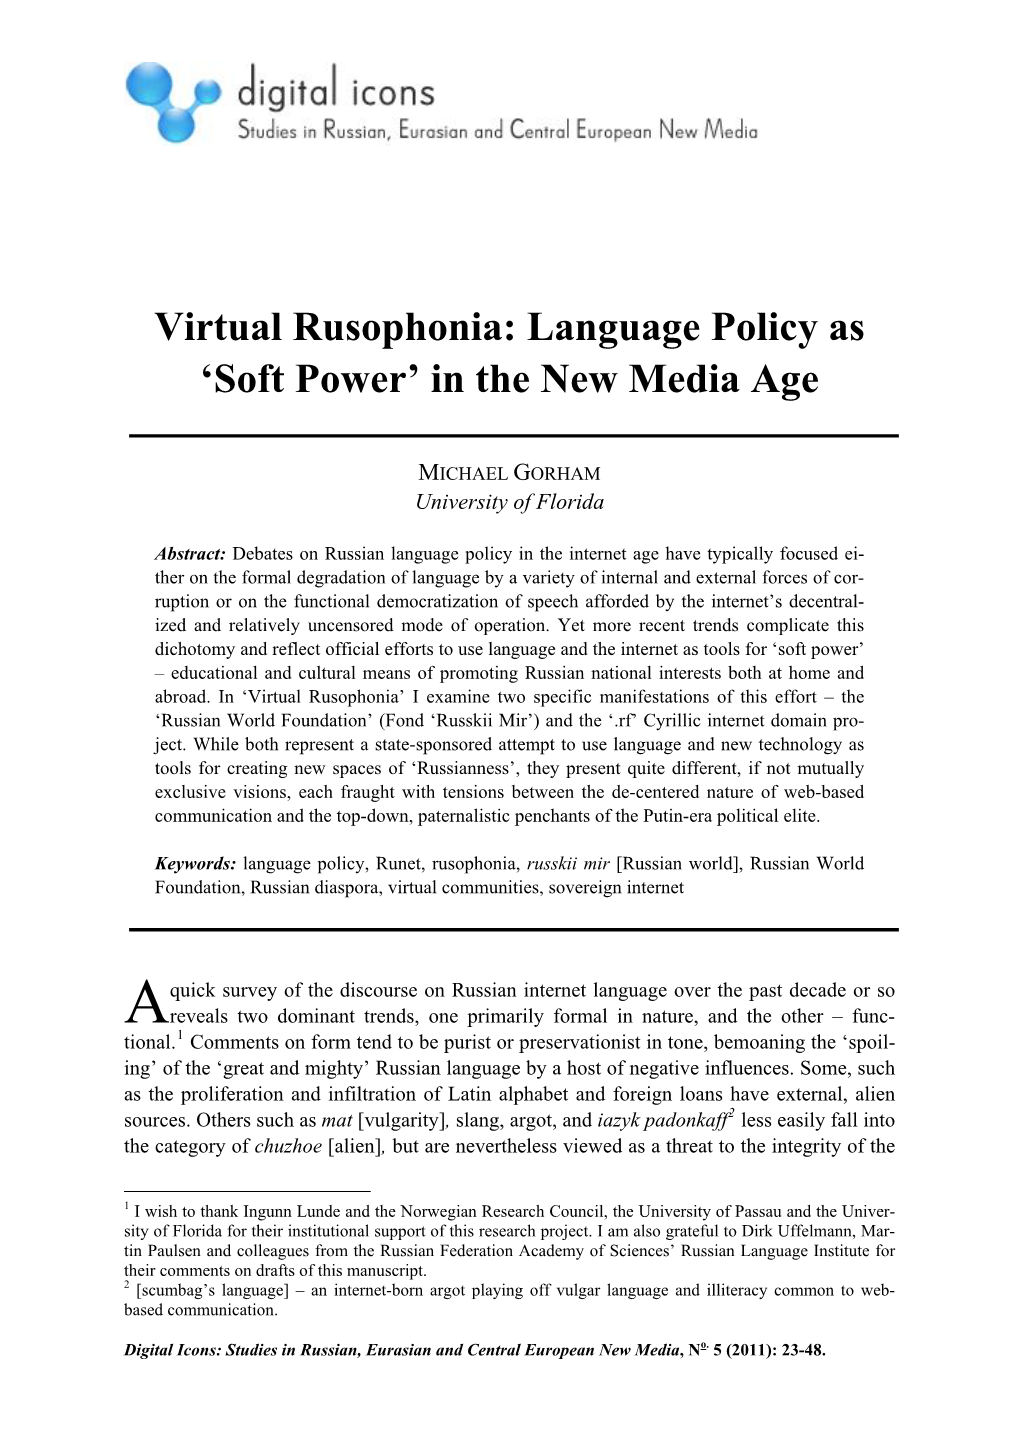 Virtual Rusophonia: Language Policy As 'Soft Power' in the New Media